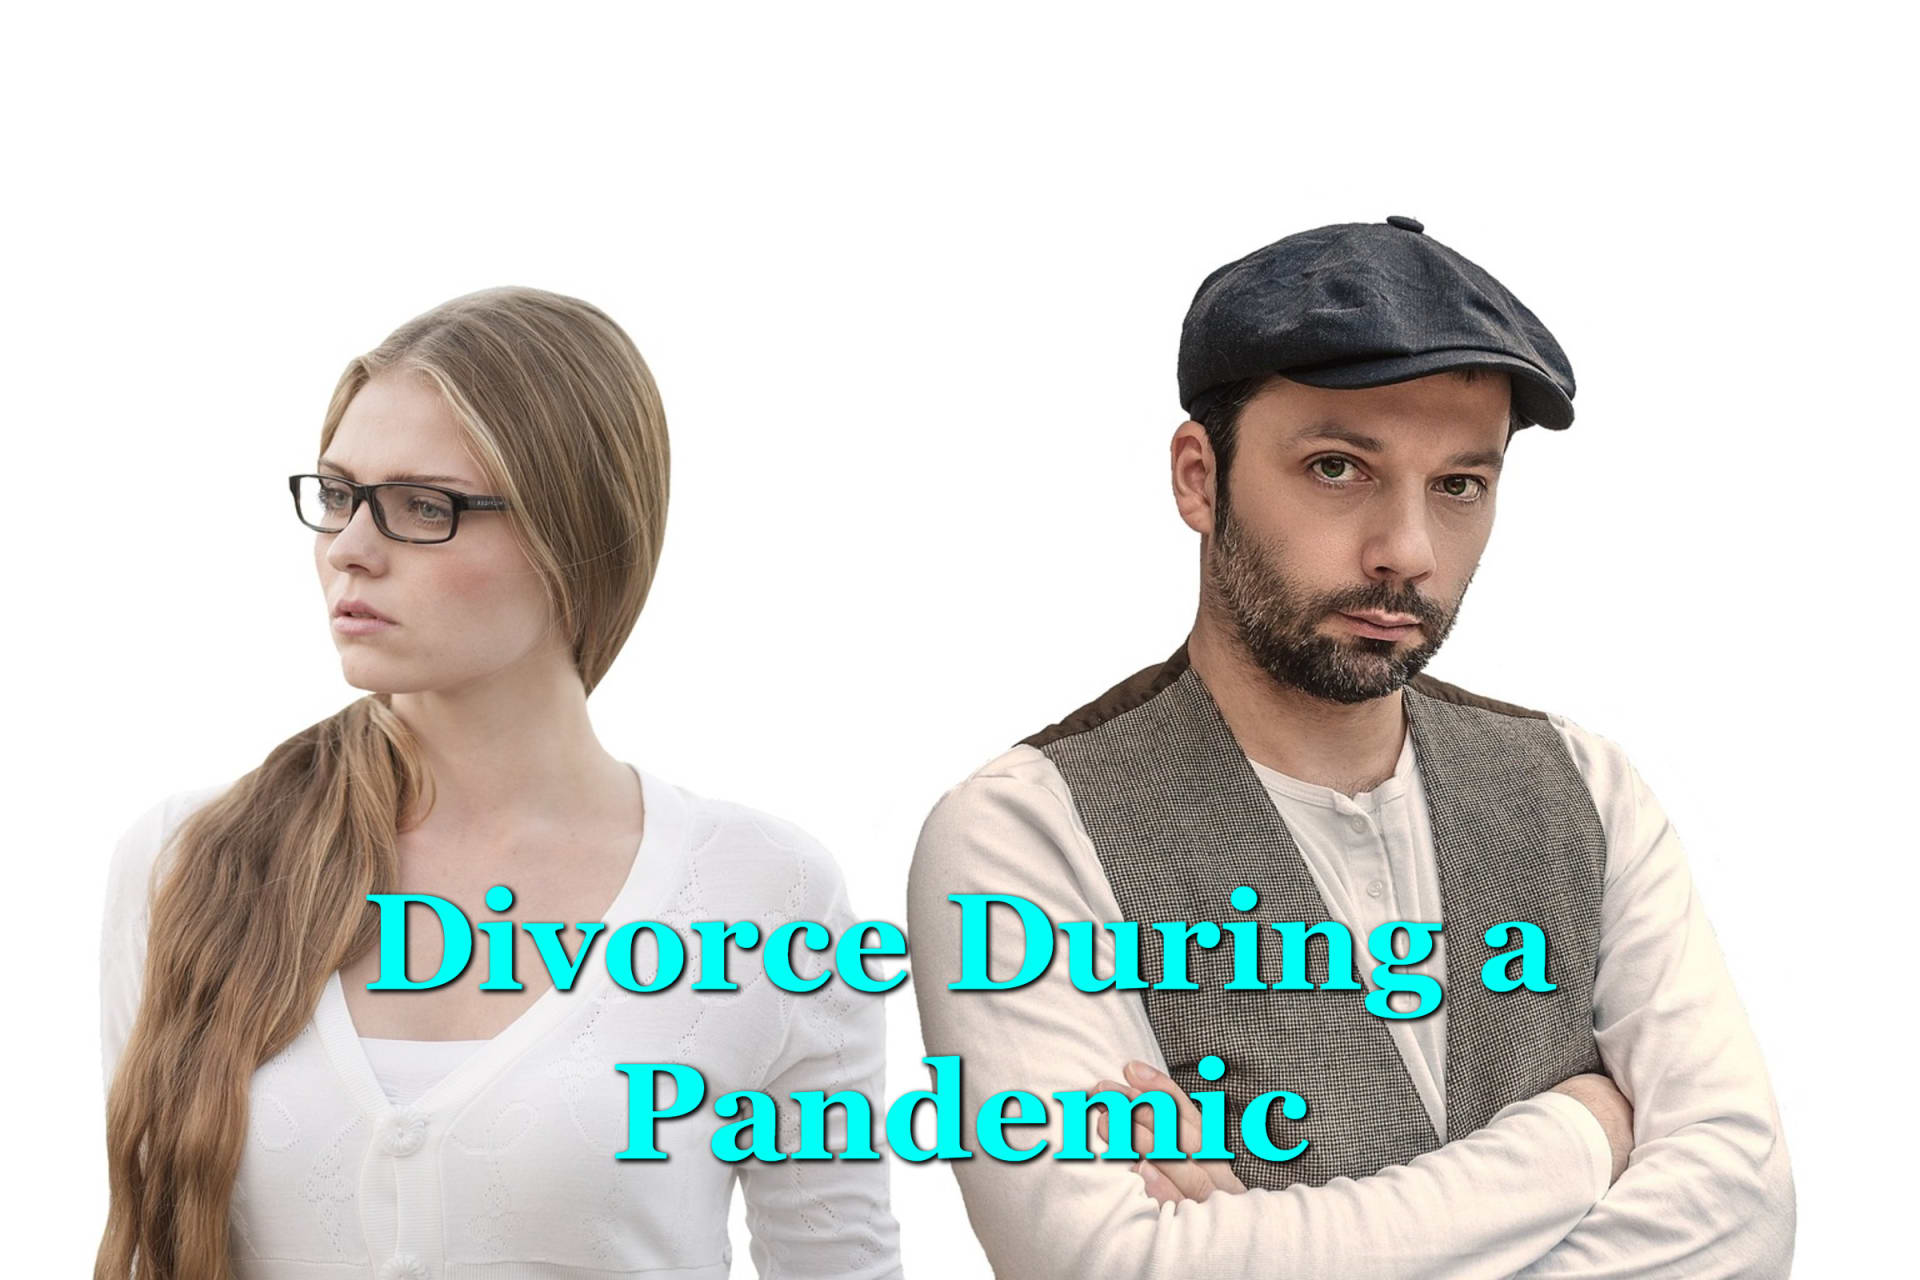 A man and woman facing away from each other as they prepare to divorce during a pandemic.